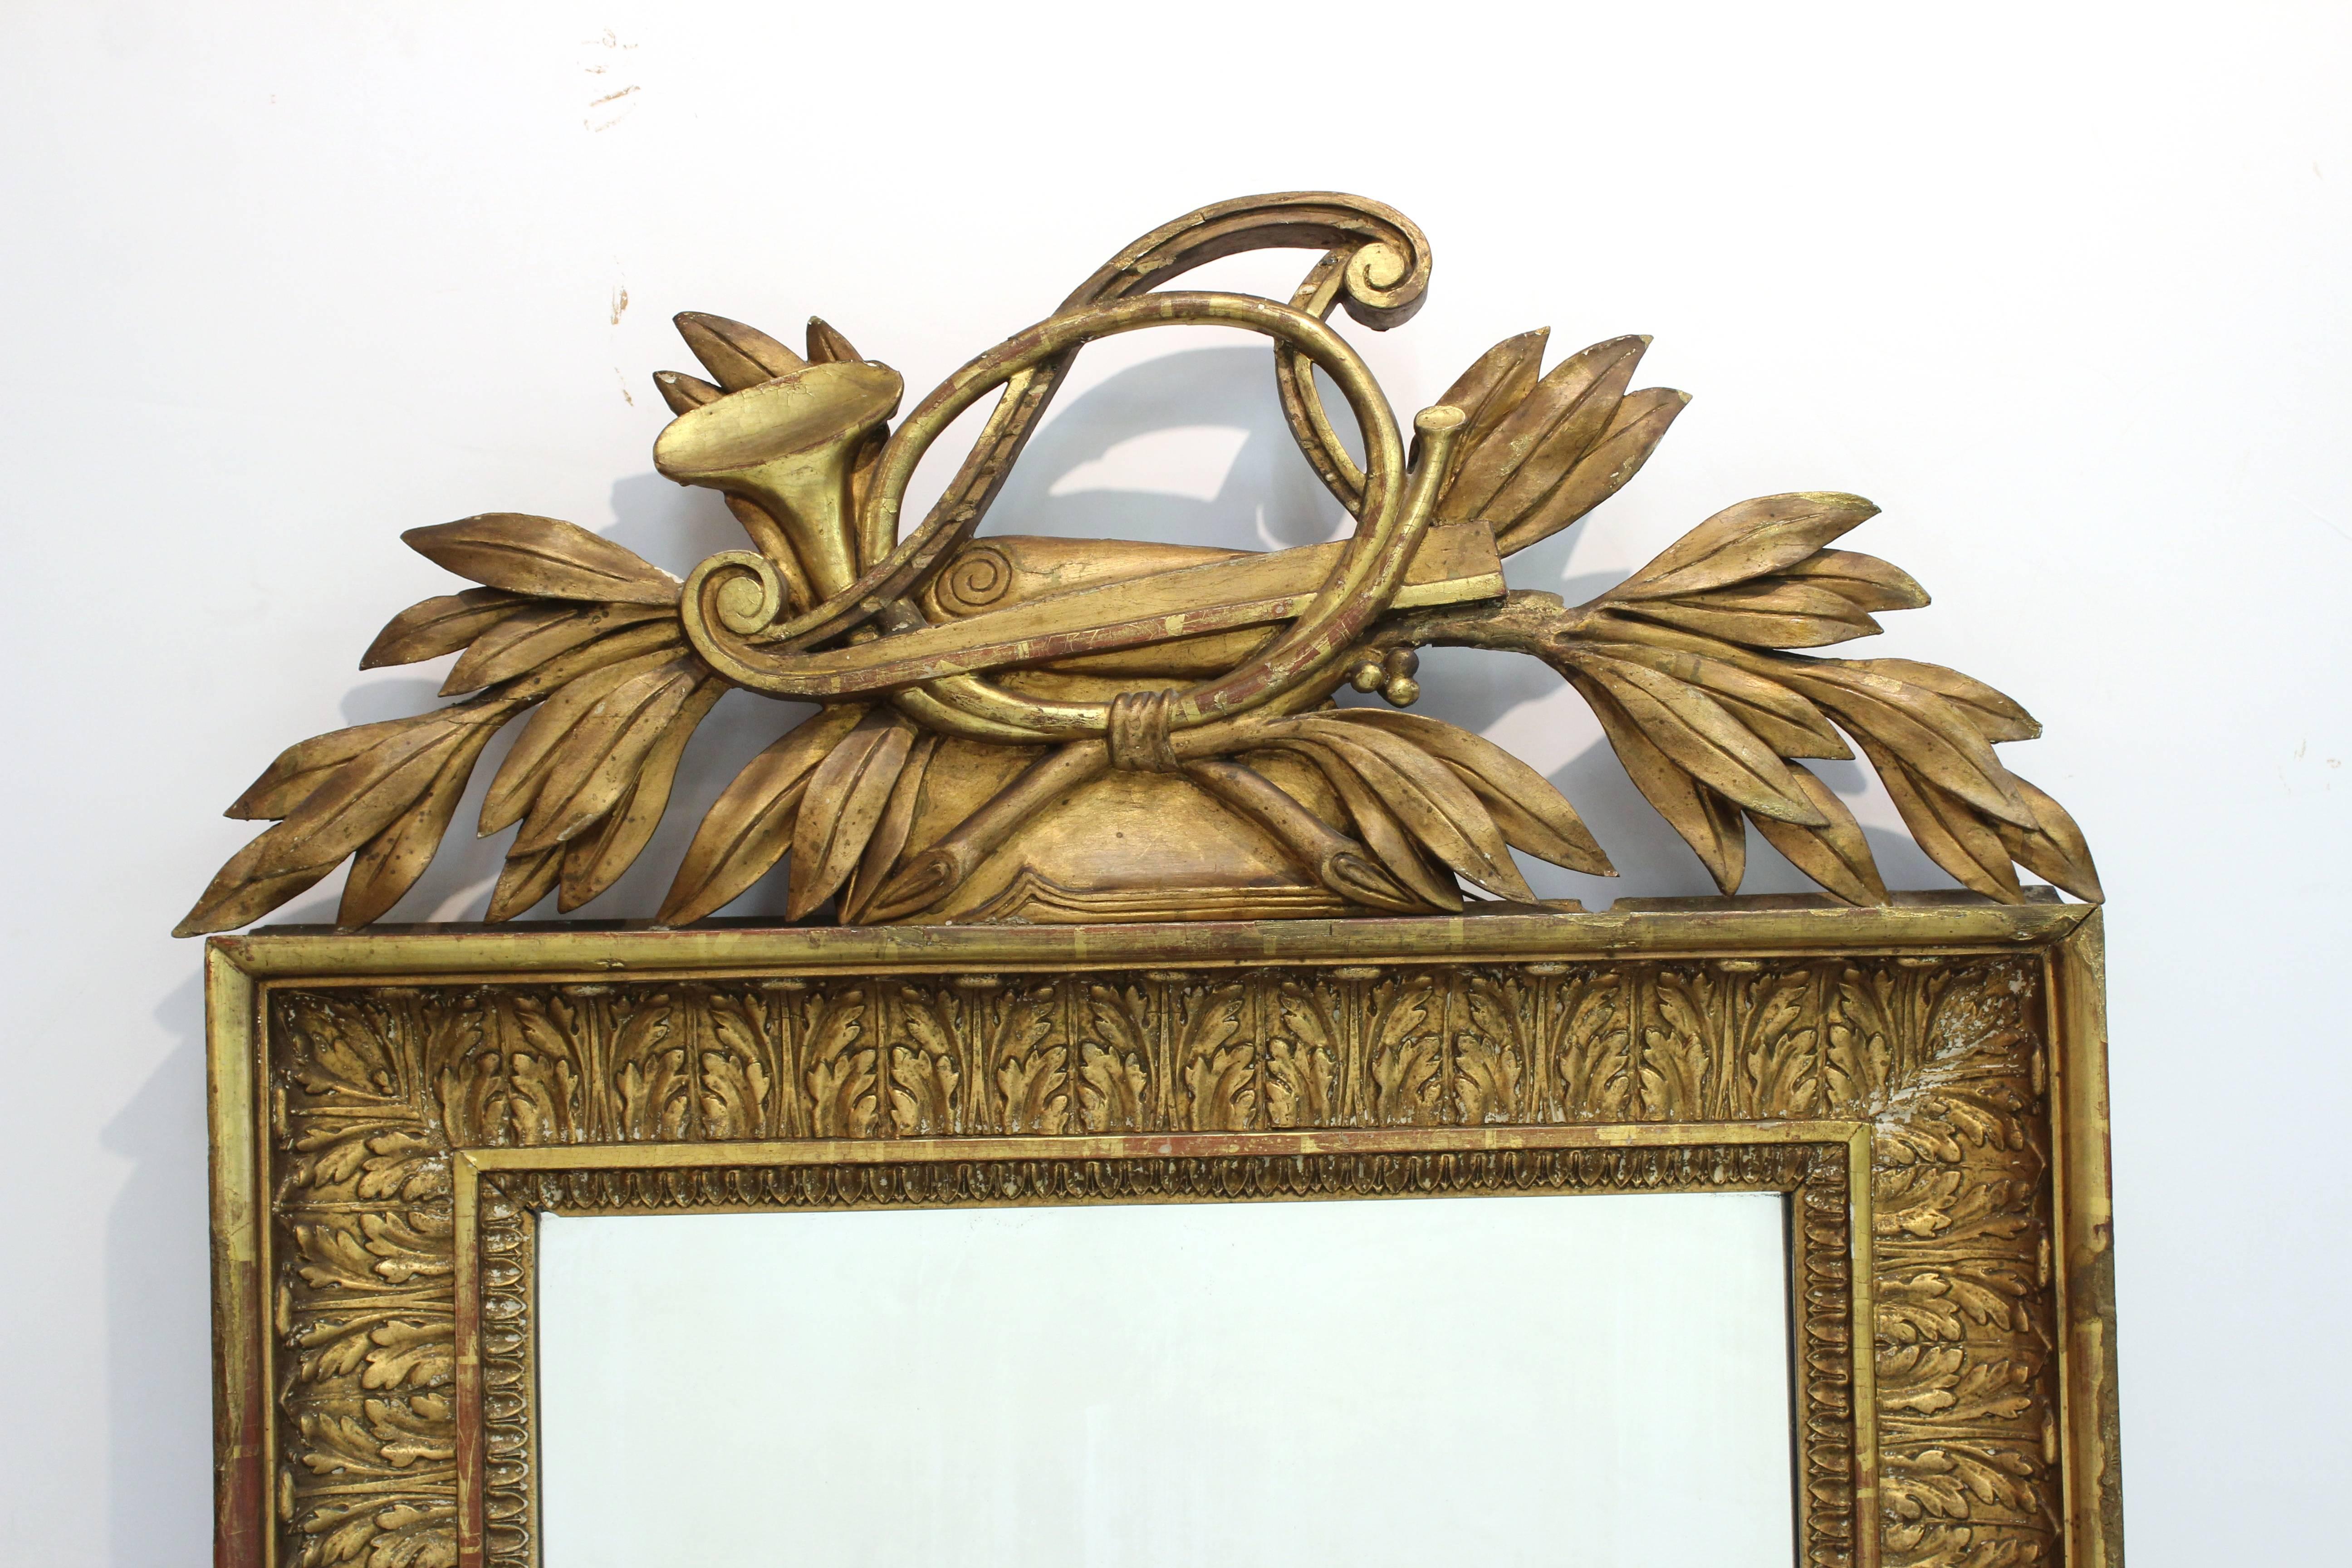 A giltwood neoclassical wall mirror framed in an acanthus leaf pattern. The mirror is topped with laurel leaves, a horn and stringless harp. Some wear to the gilt and wood but in good condition.